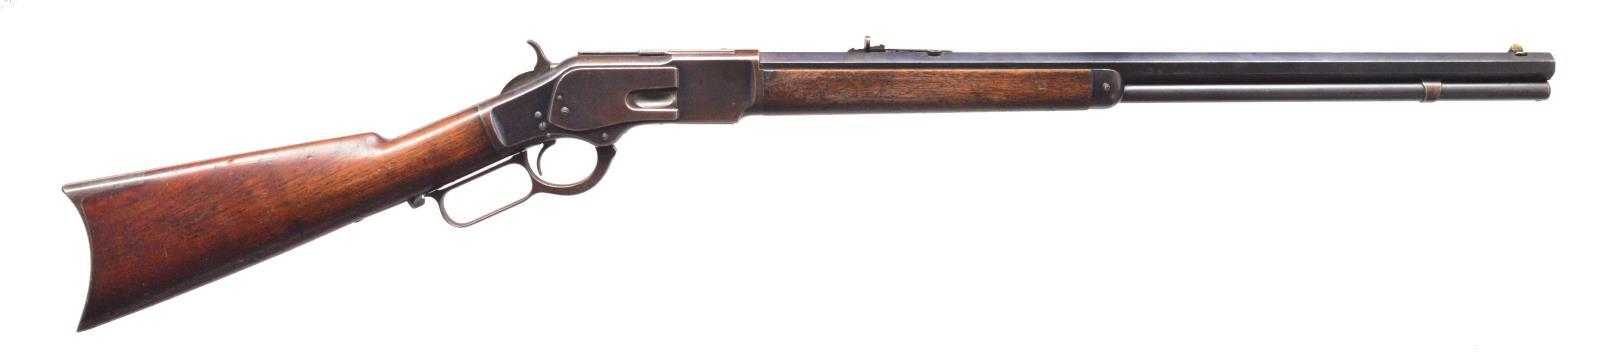 WINCHESTER 1873 SECOND MODEL LEVER ACTION RIFLE.